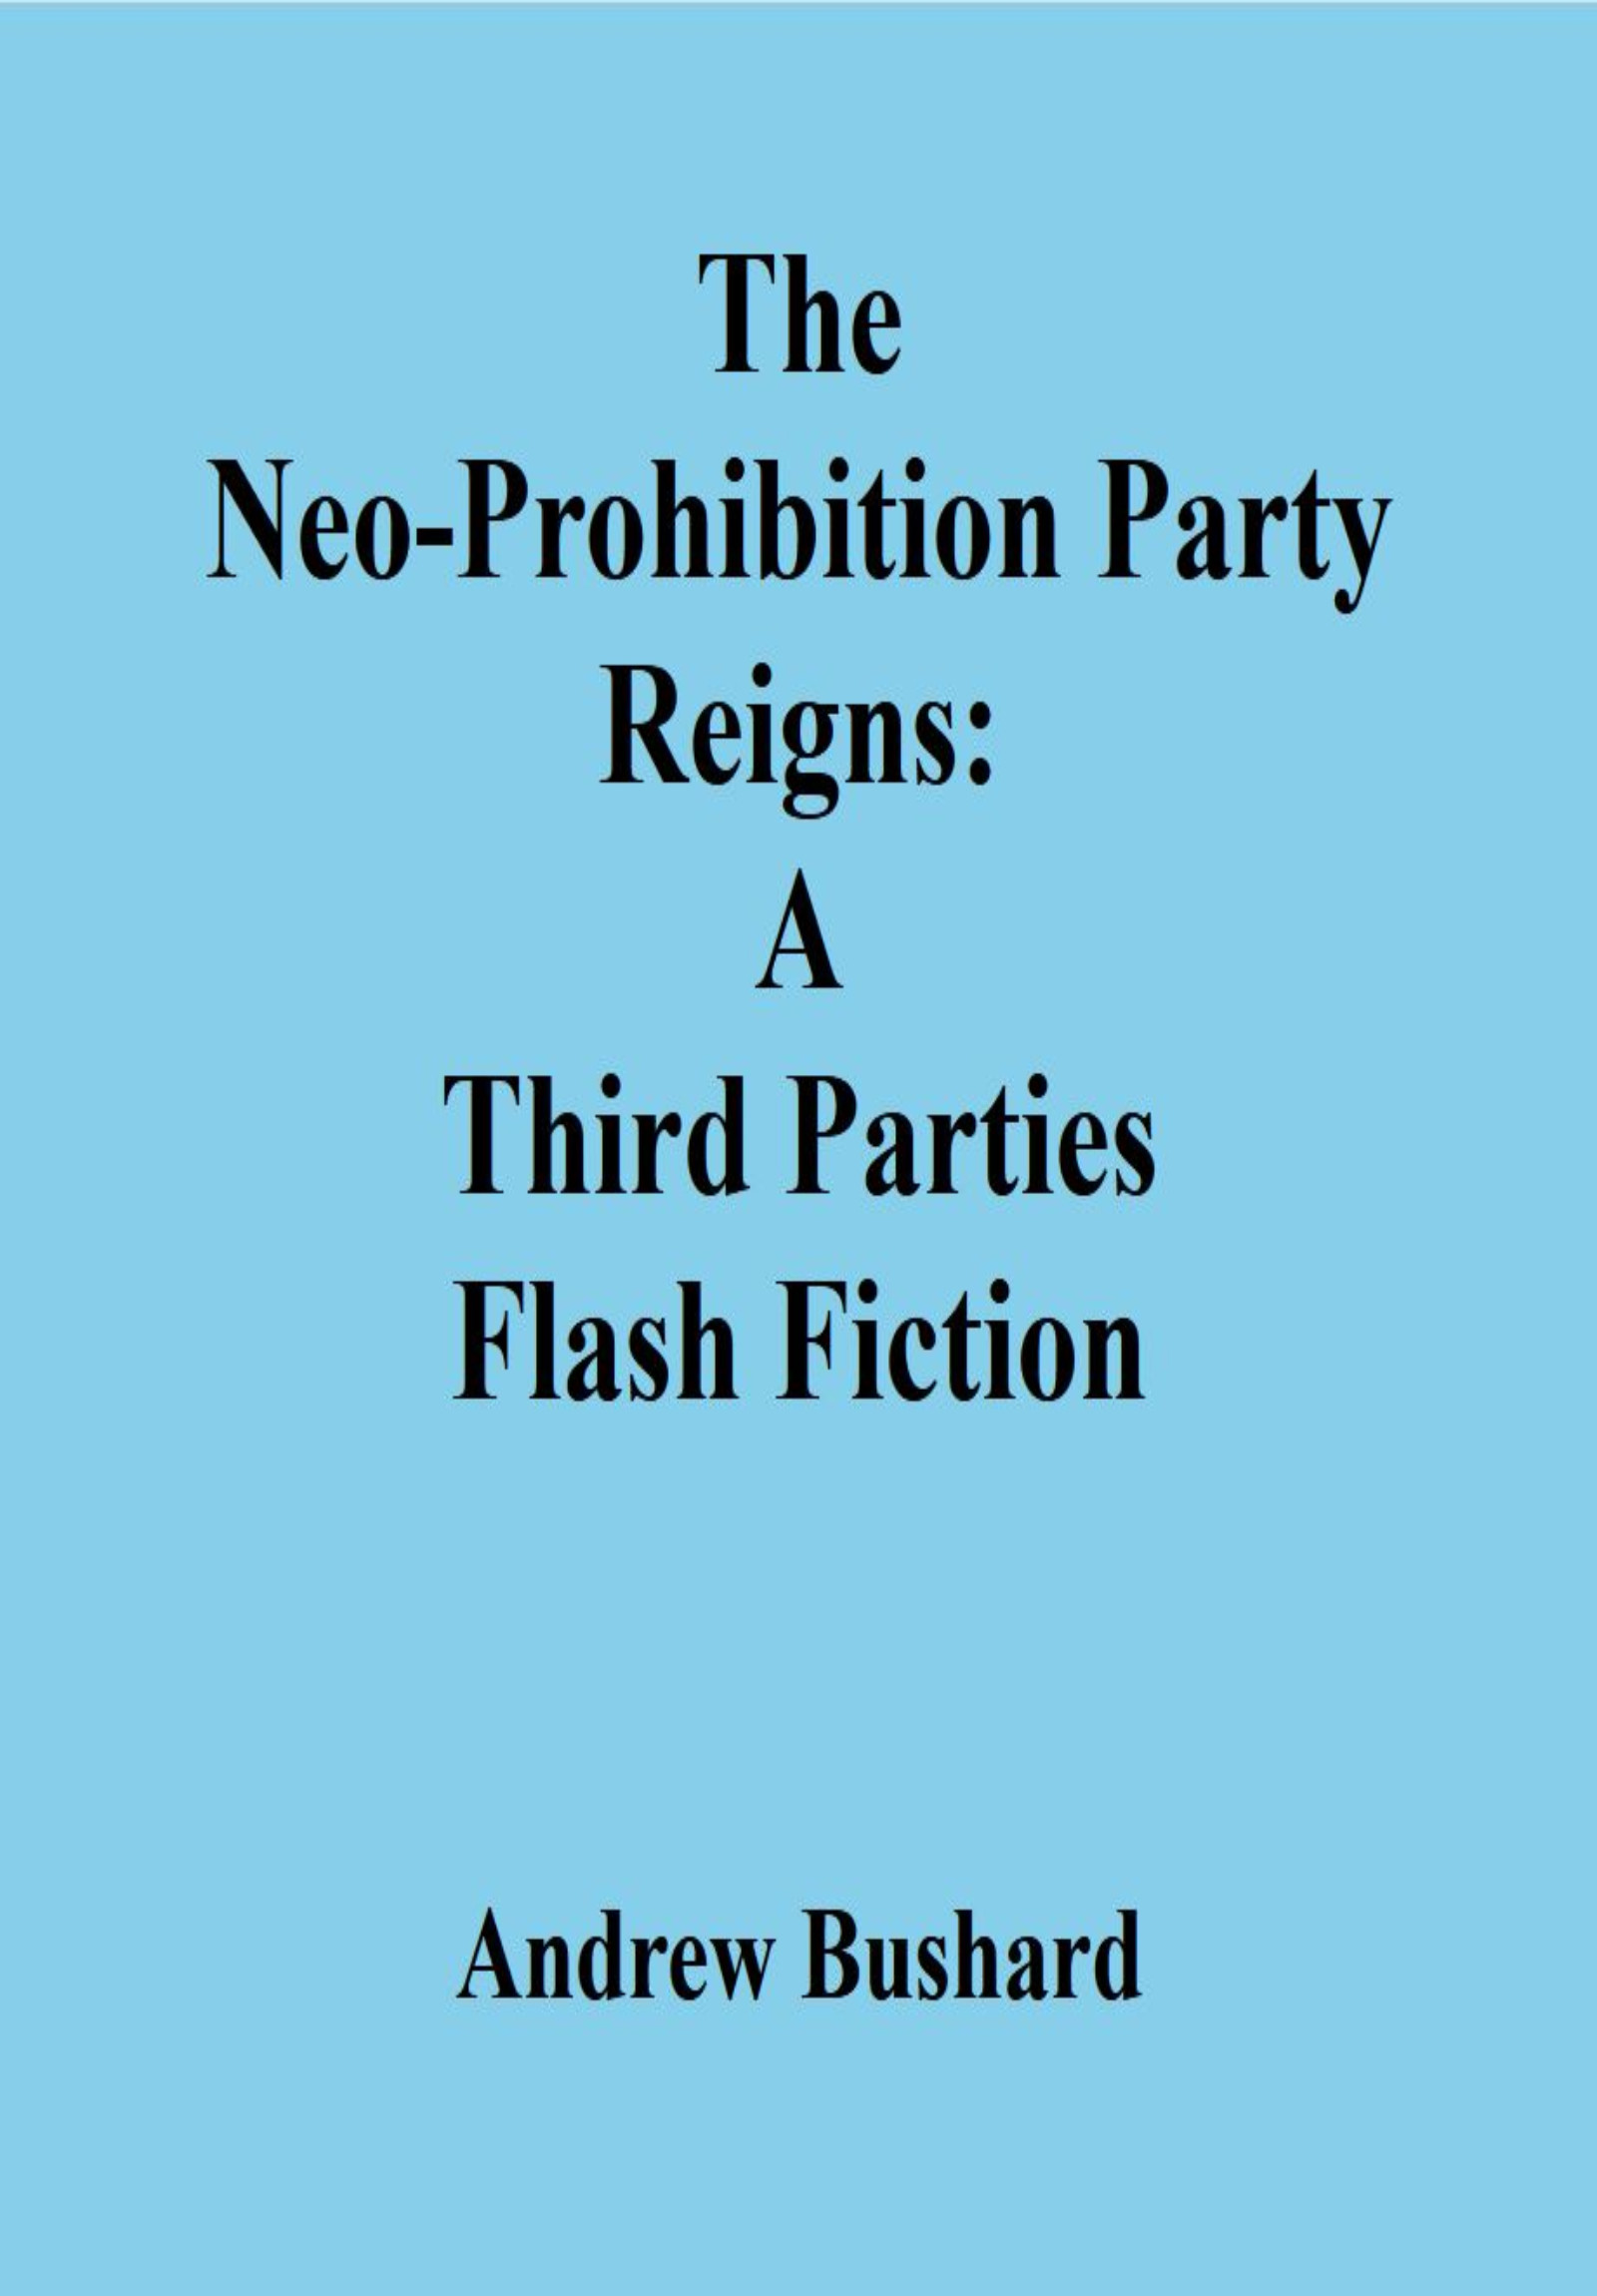 The Neo-Prohibition Party Reigns: A Third Parties Flash Fiction's featured image